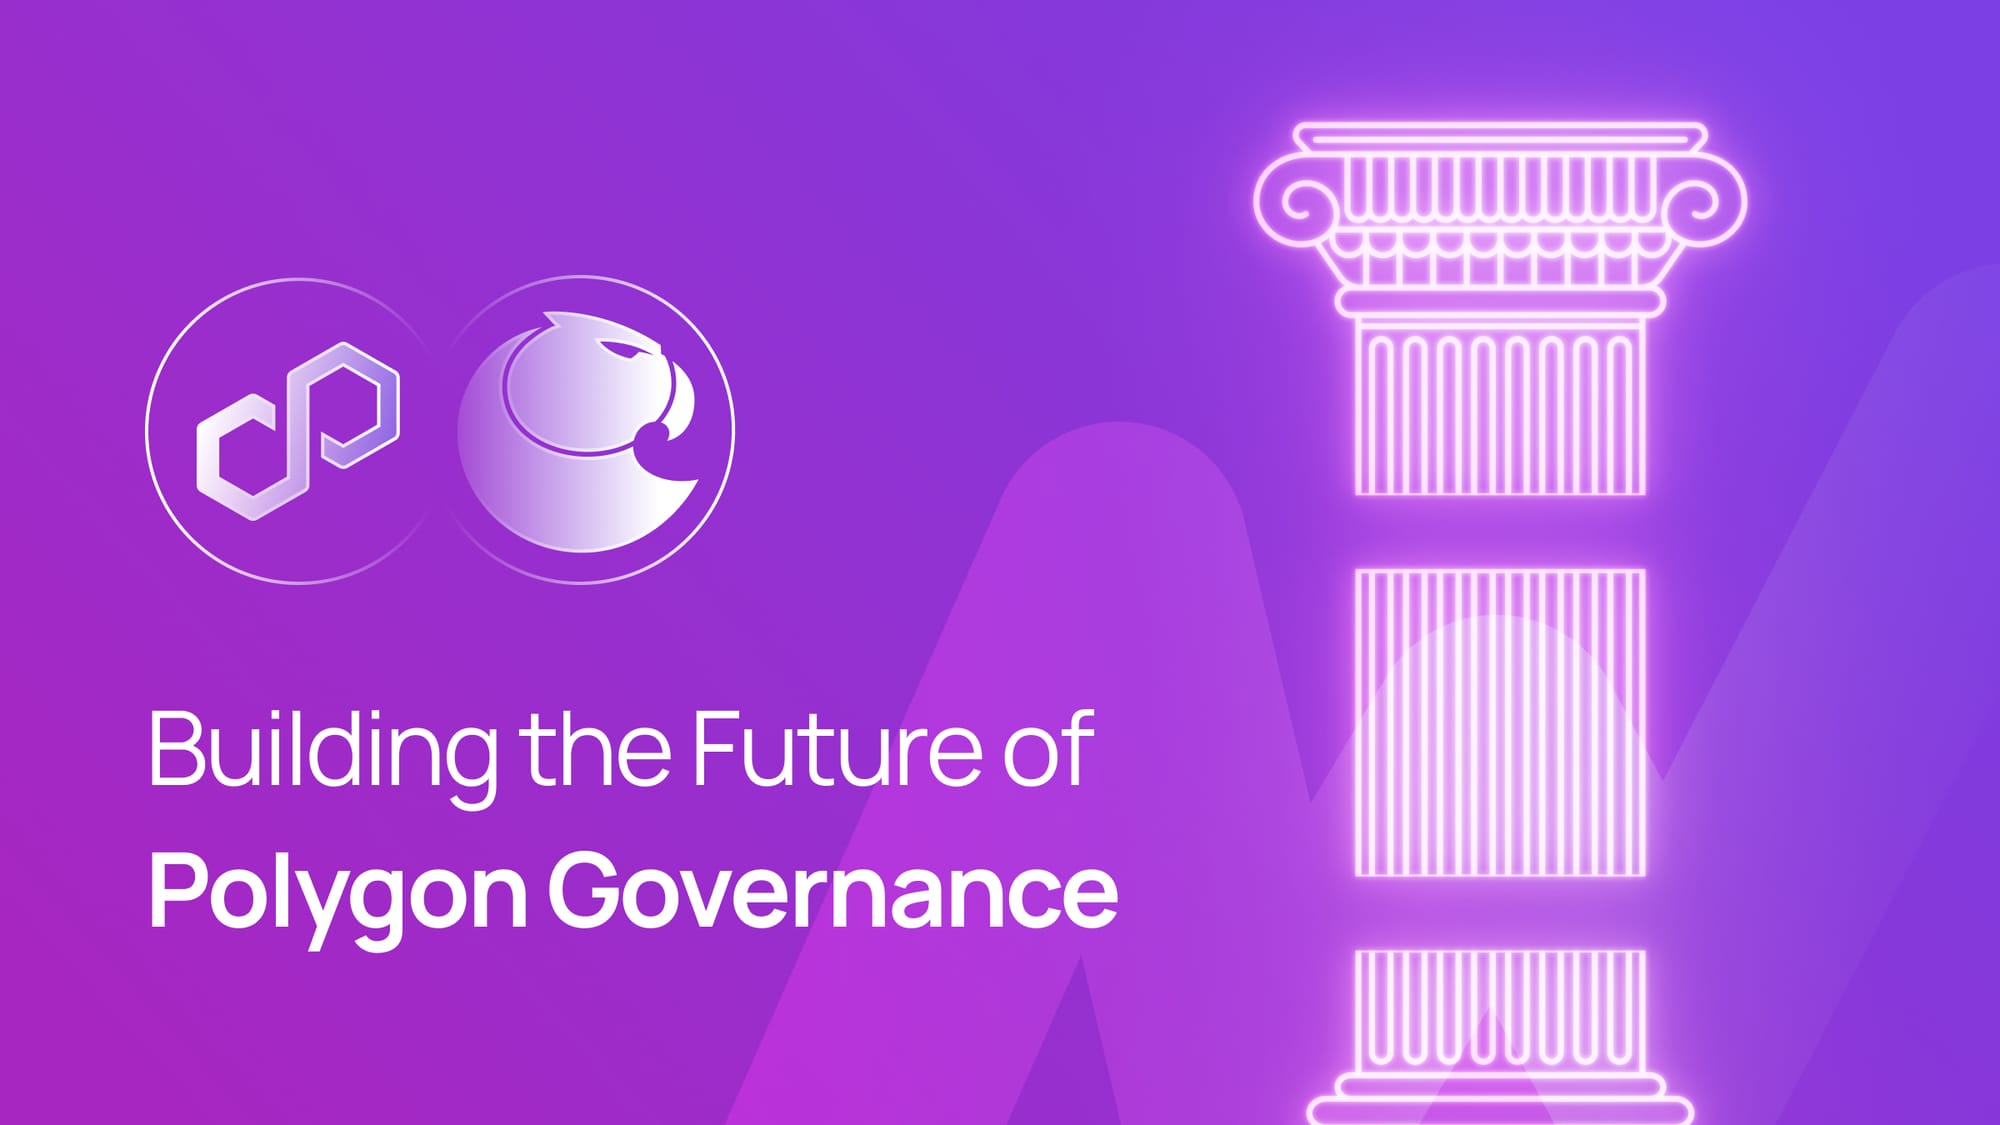 Building the Future of Polygon Governance